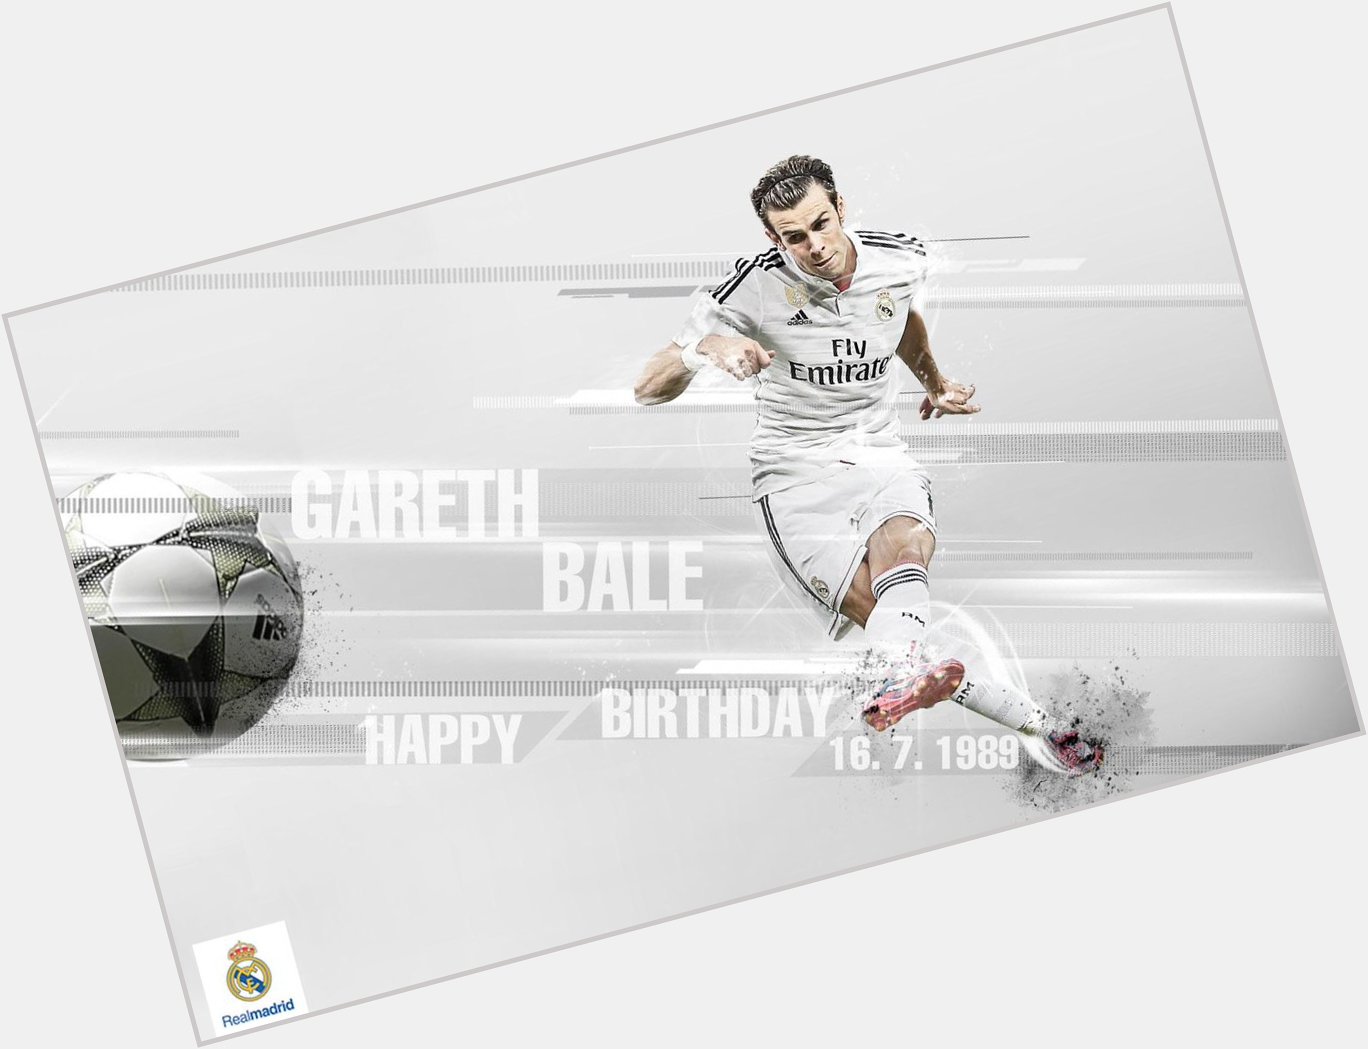 Happy birthday to Gareth Bale who turns 26 today ! 